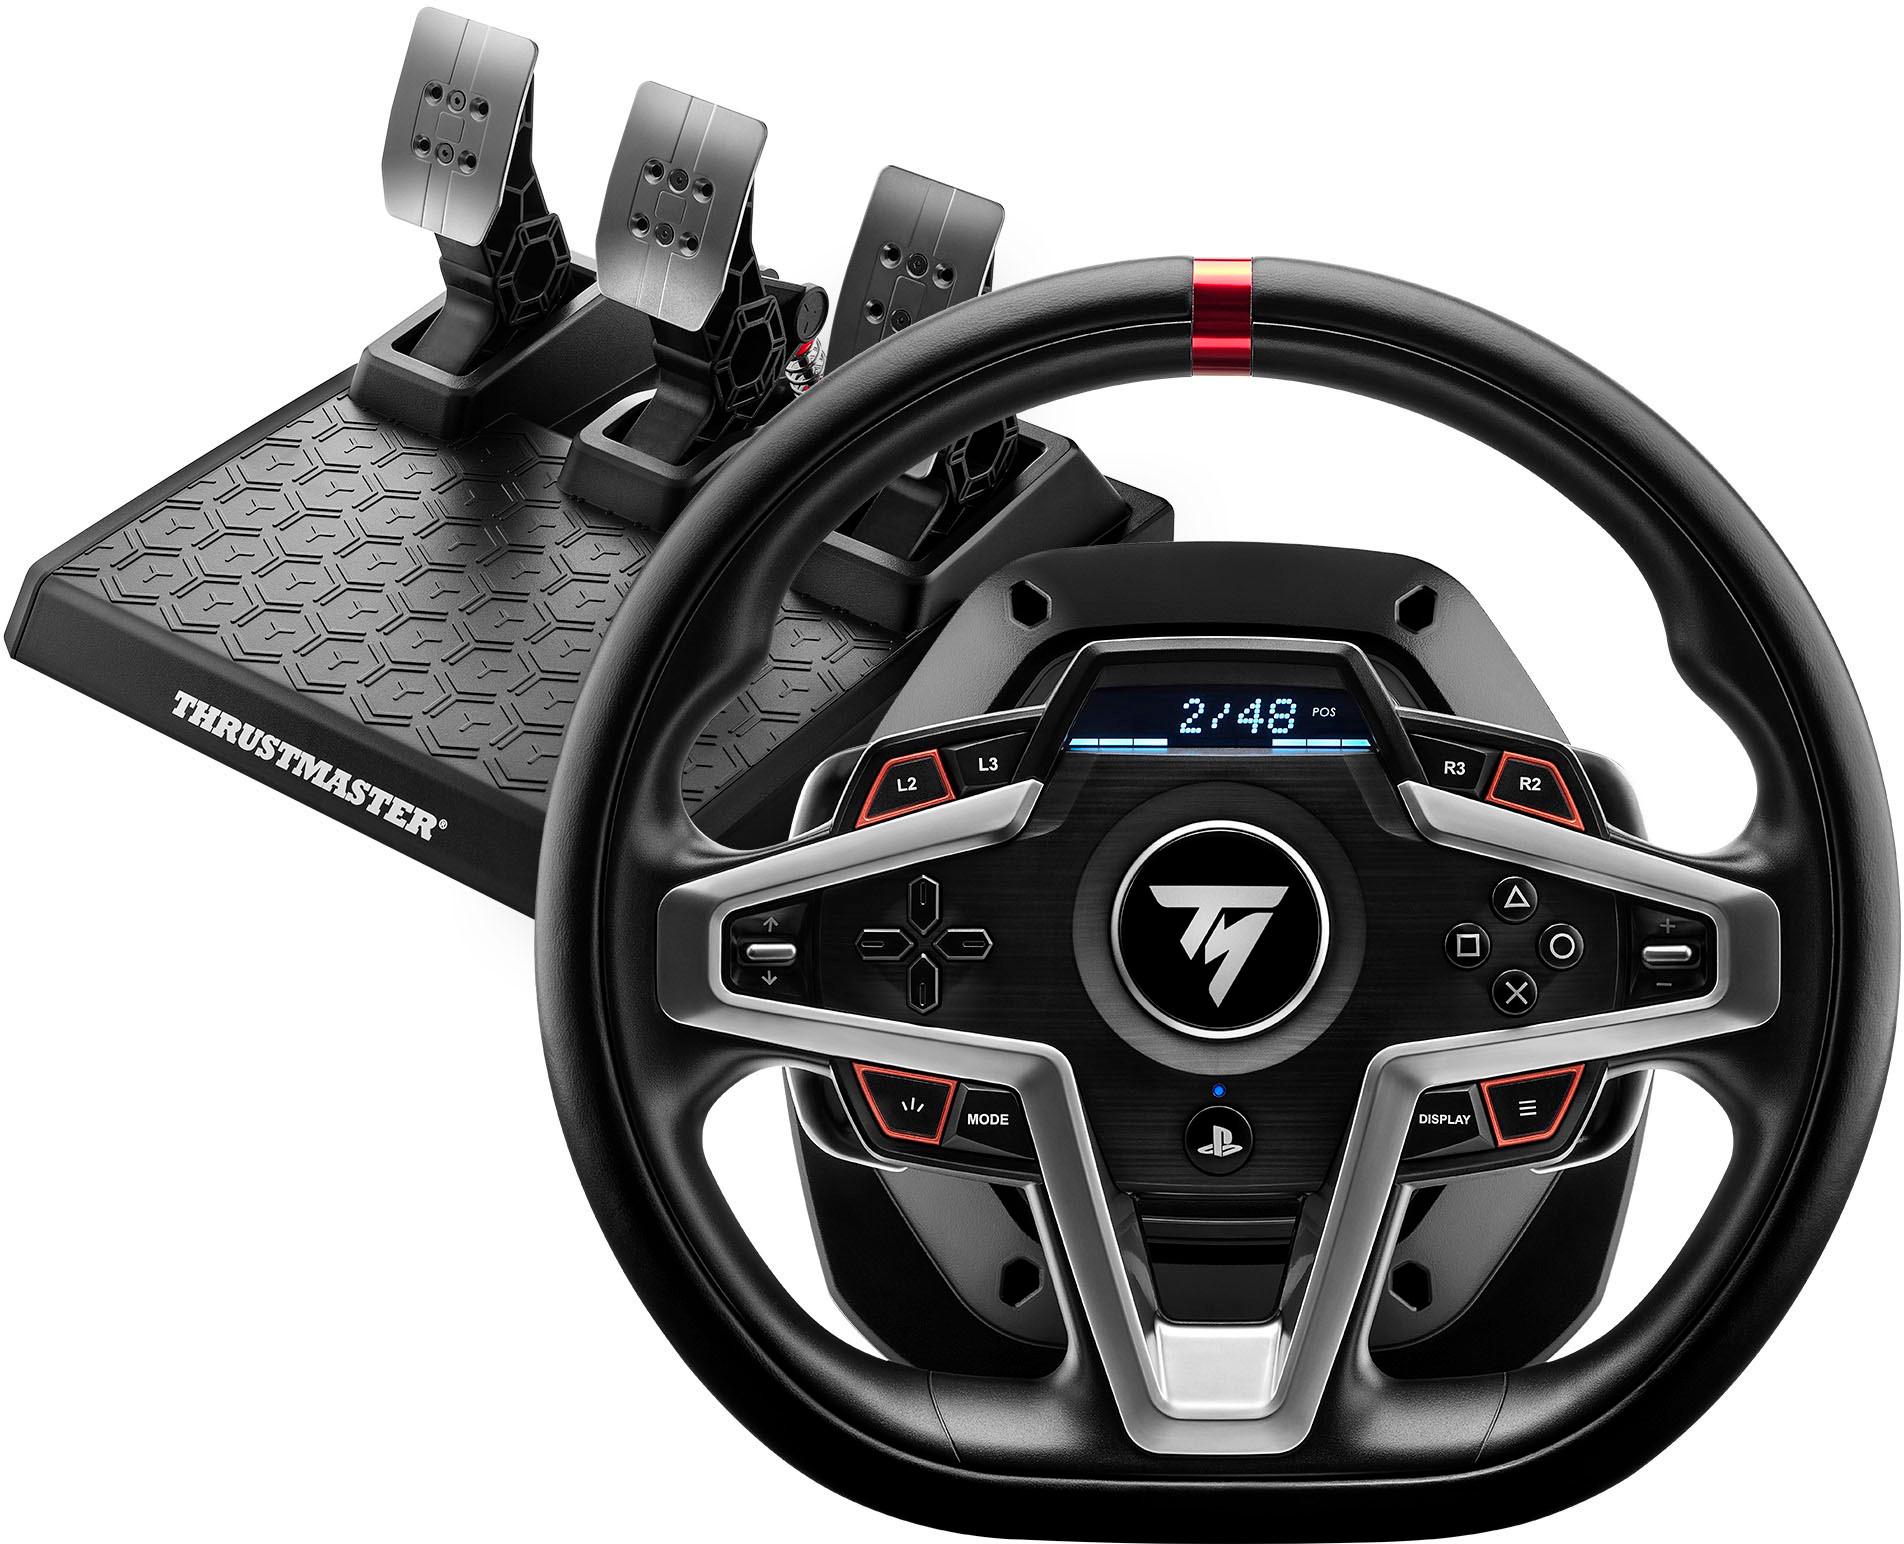 Rent Thrustmaster T248 Racing Steering Wheel from €12.90 per month